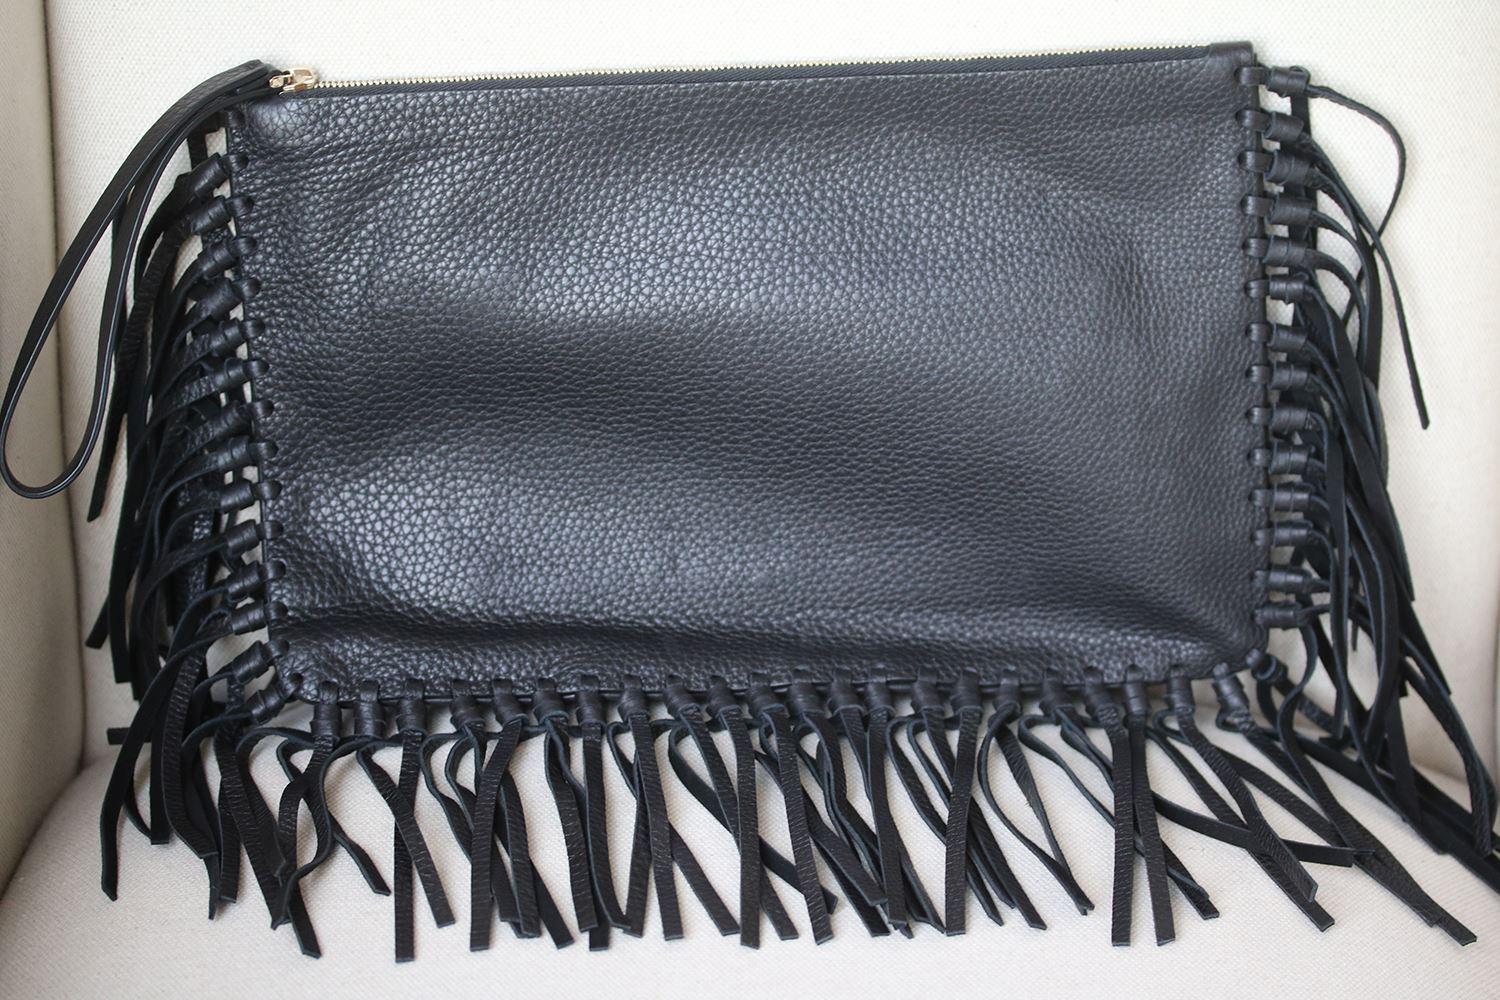 Grained leather with suede lining and gold-tone hardware. Zip top closure. Interior zip pocket and pockets. Fringe trim. Made in Italy.

Dimensions: Approx. 13.5 x 16 x 1 inches

Condition: As new condition, no sign of wear. 